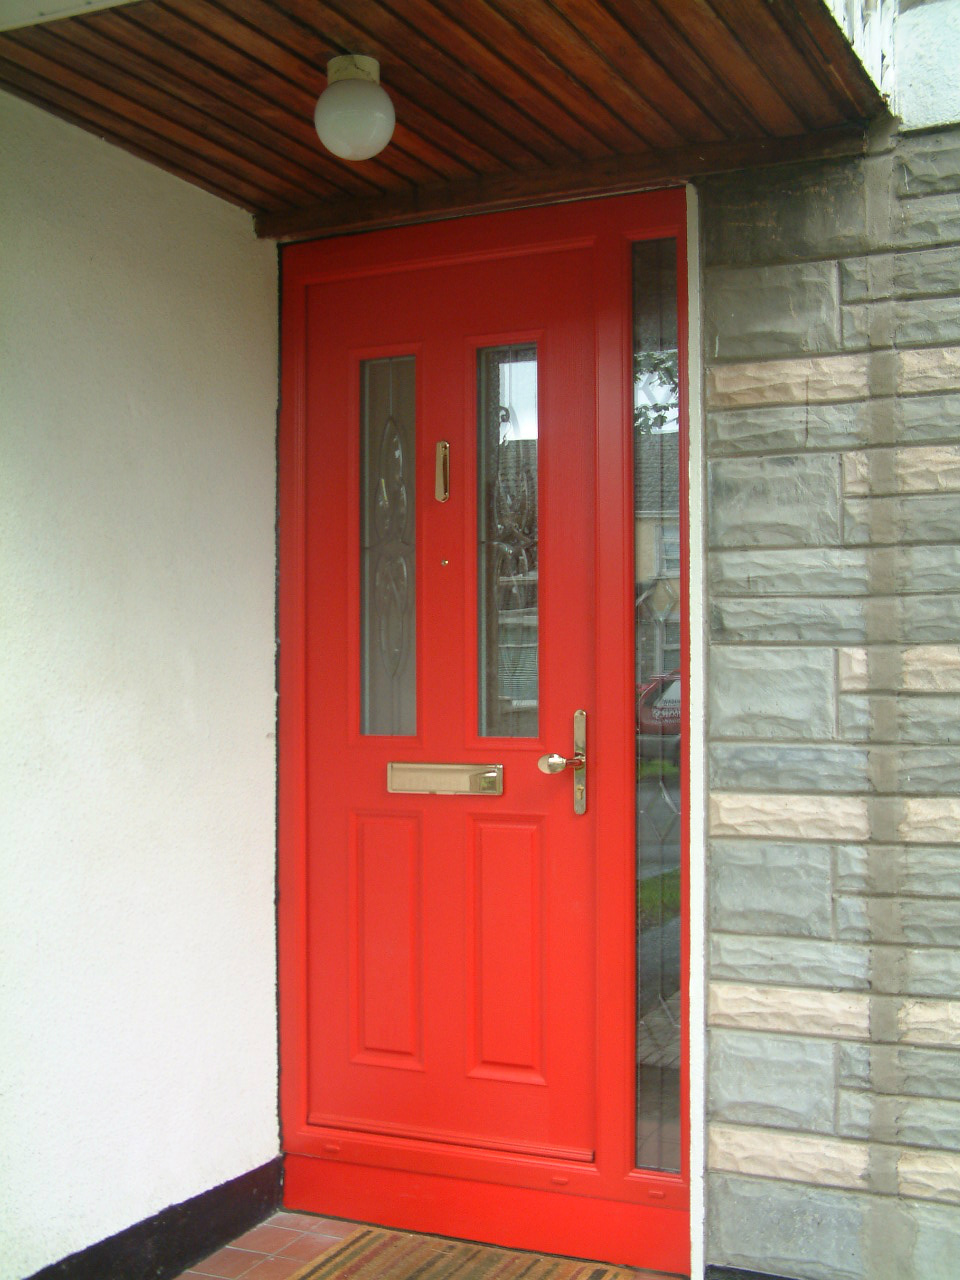 TRAFFIC RED APEER APM2 COMPOSITE FRONT DDOR FITTED BY ASGARD WINDOWS IN DUBLIN 15.